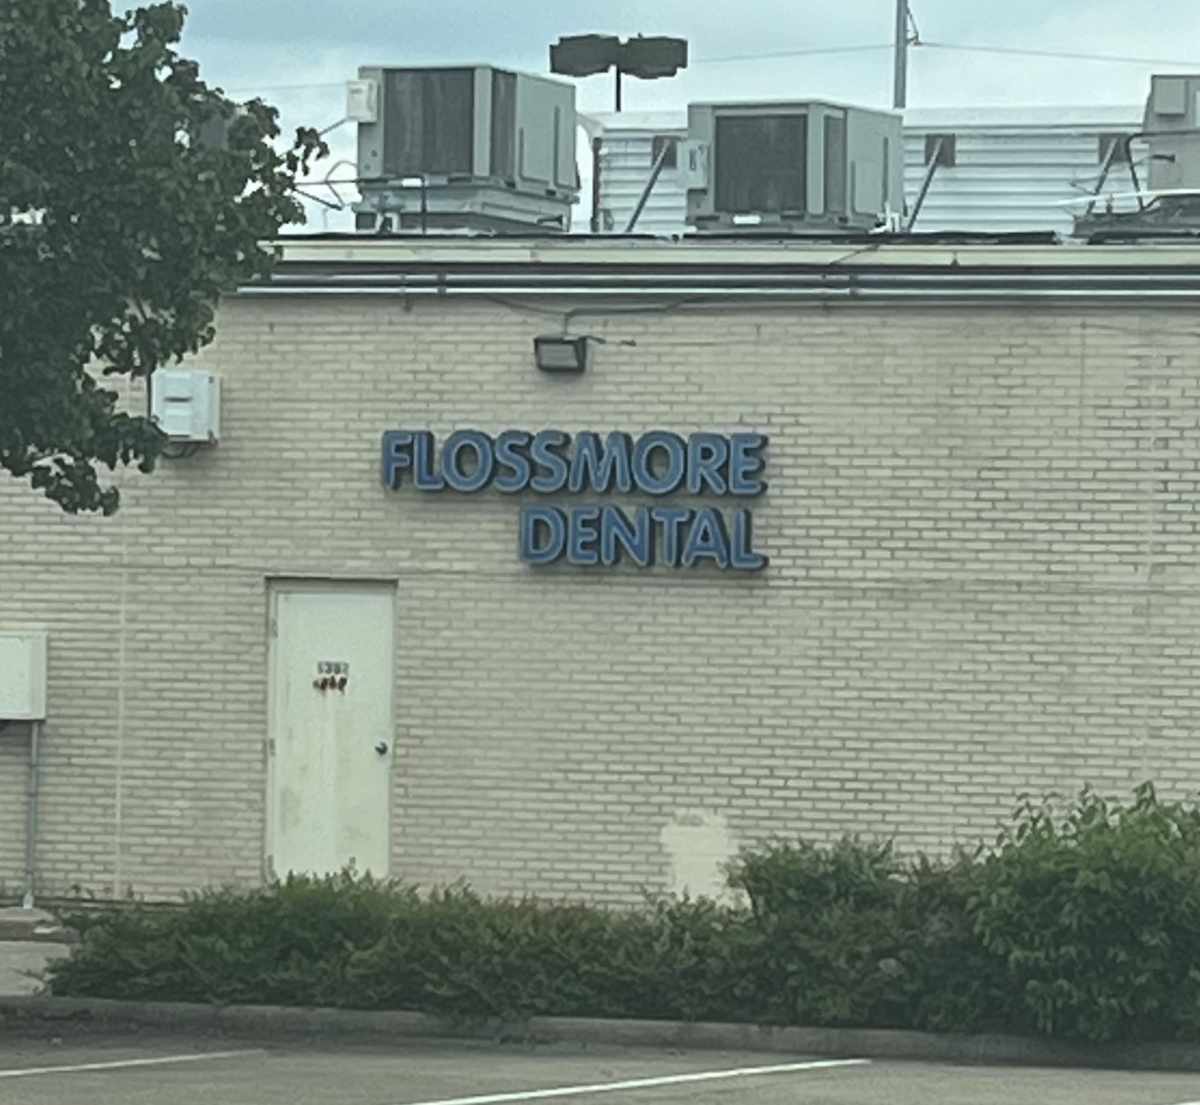 This dentist must have gotten tired of lecturing all their patients